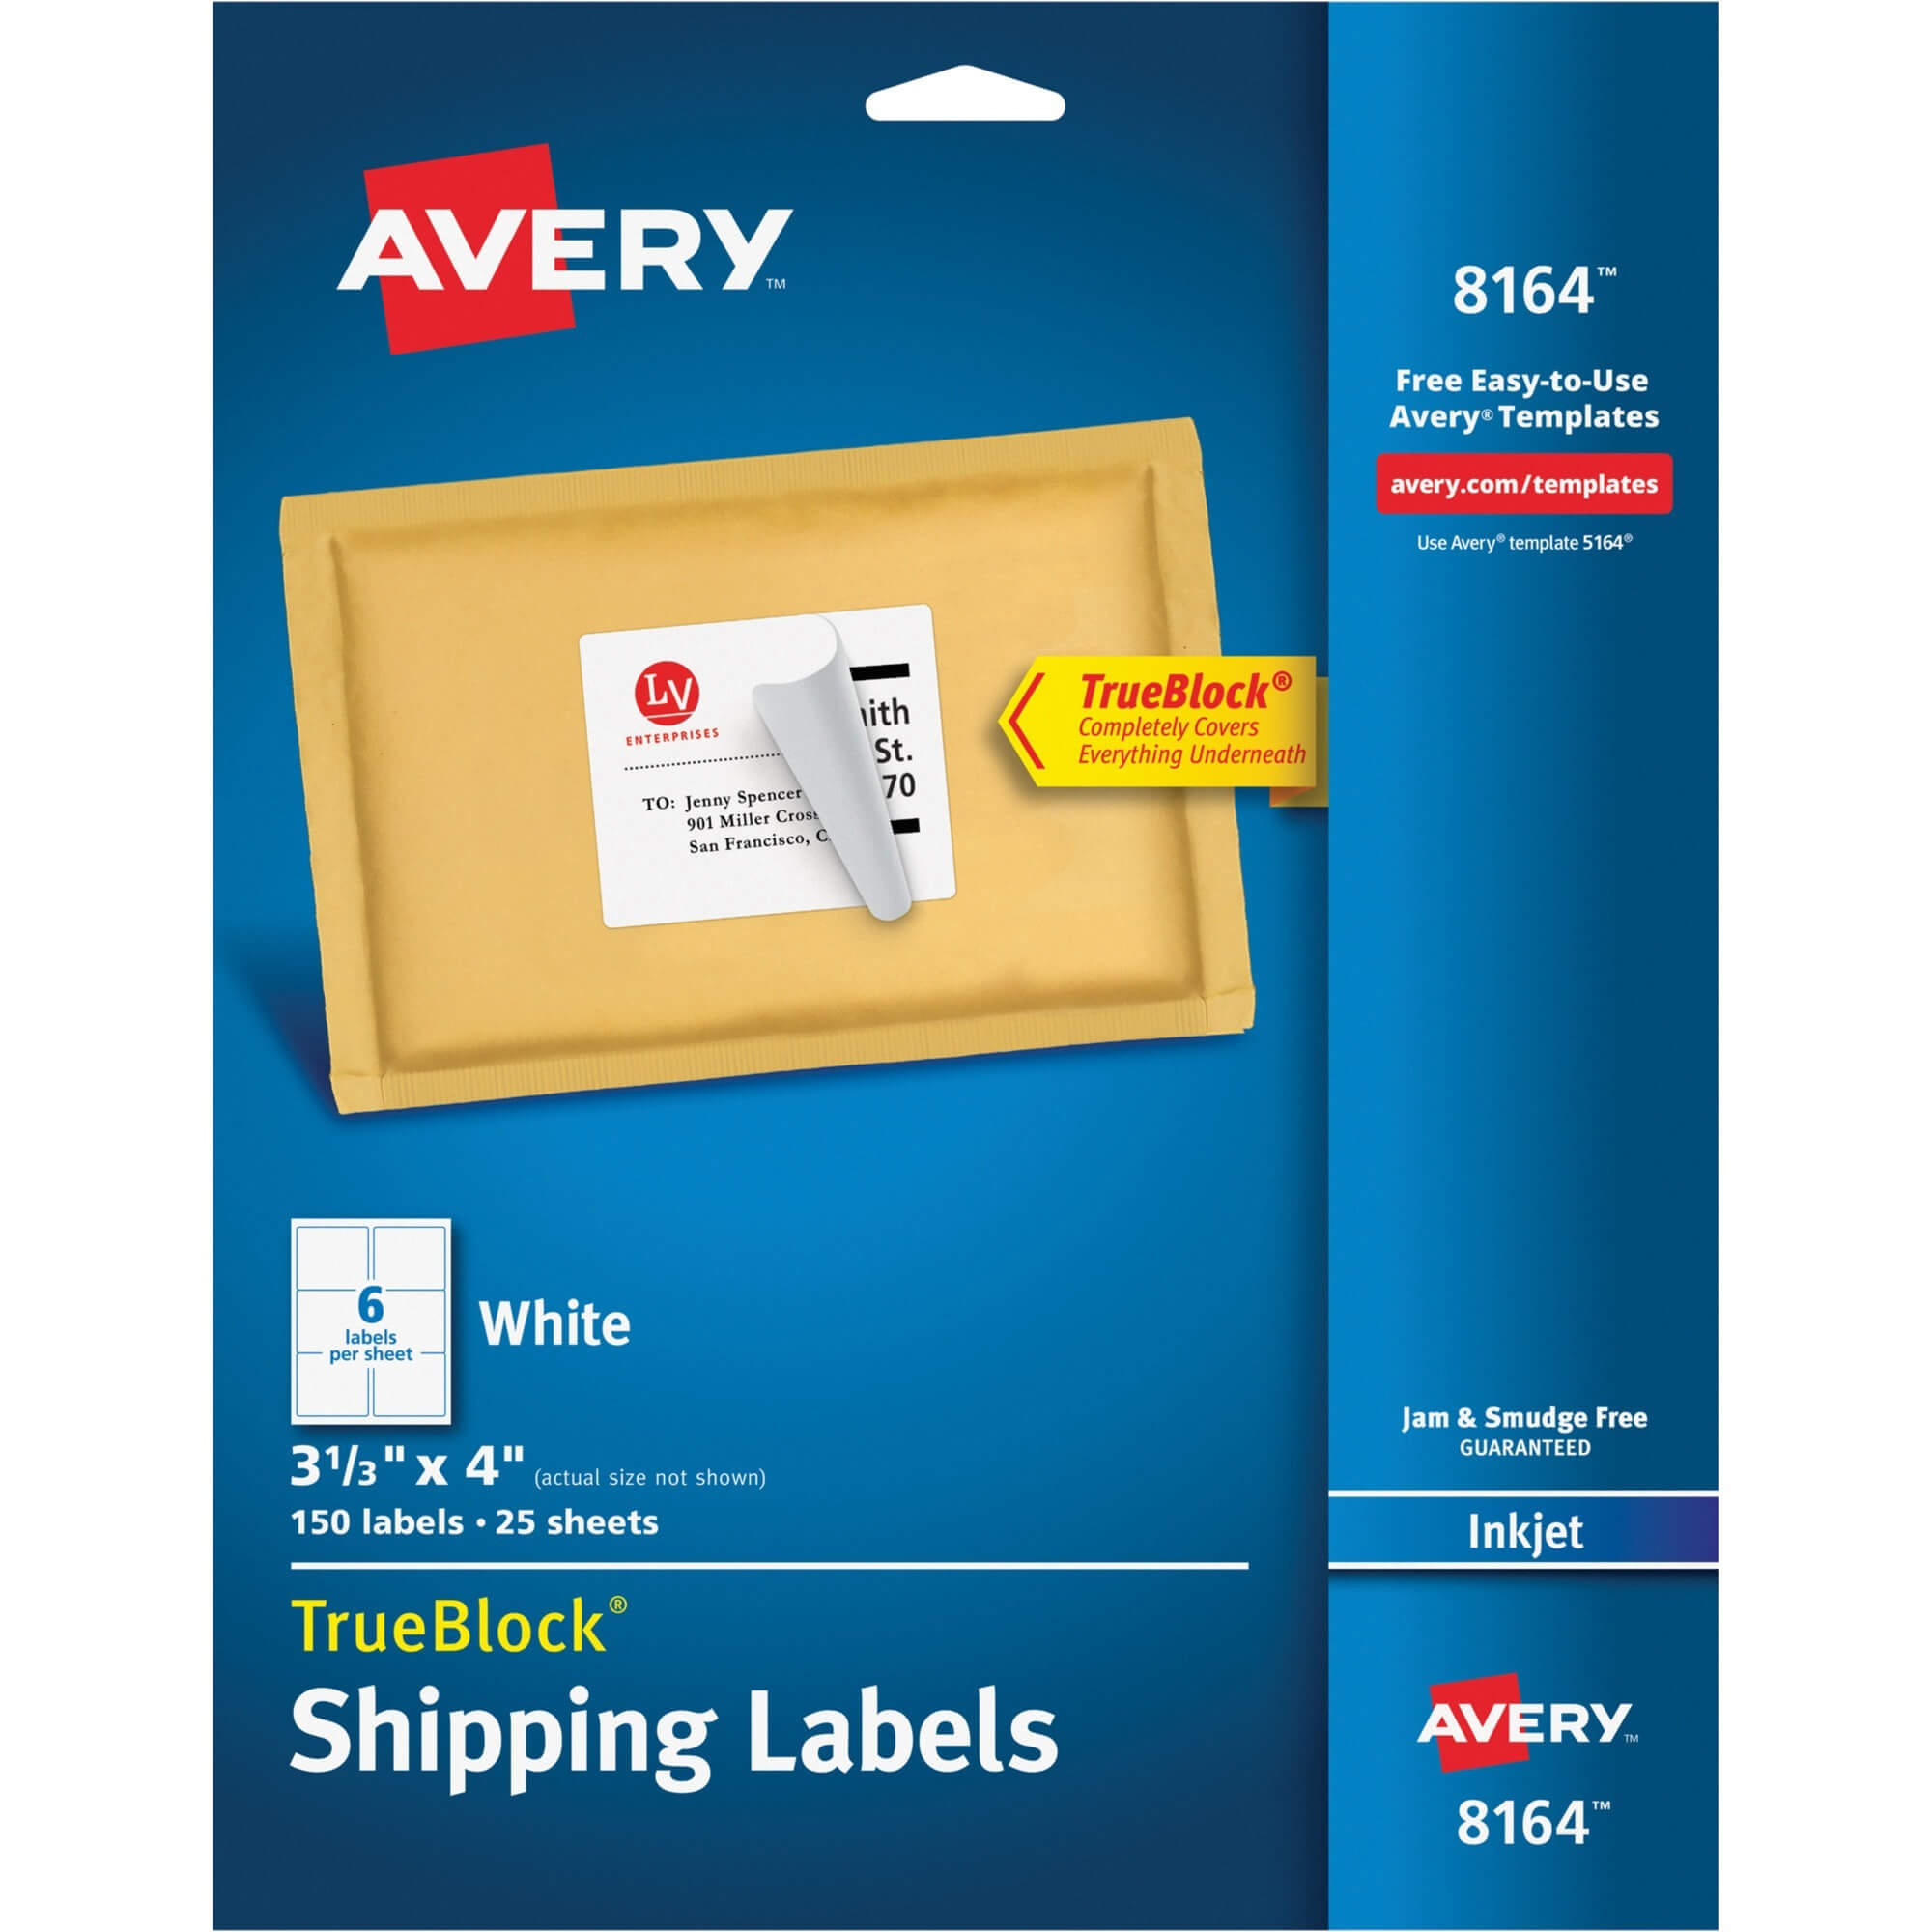 Ave8164 With 2X4 Label Template